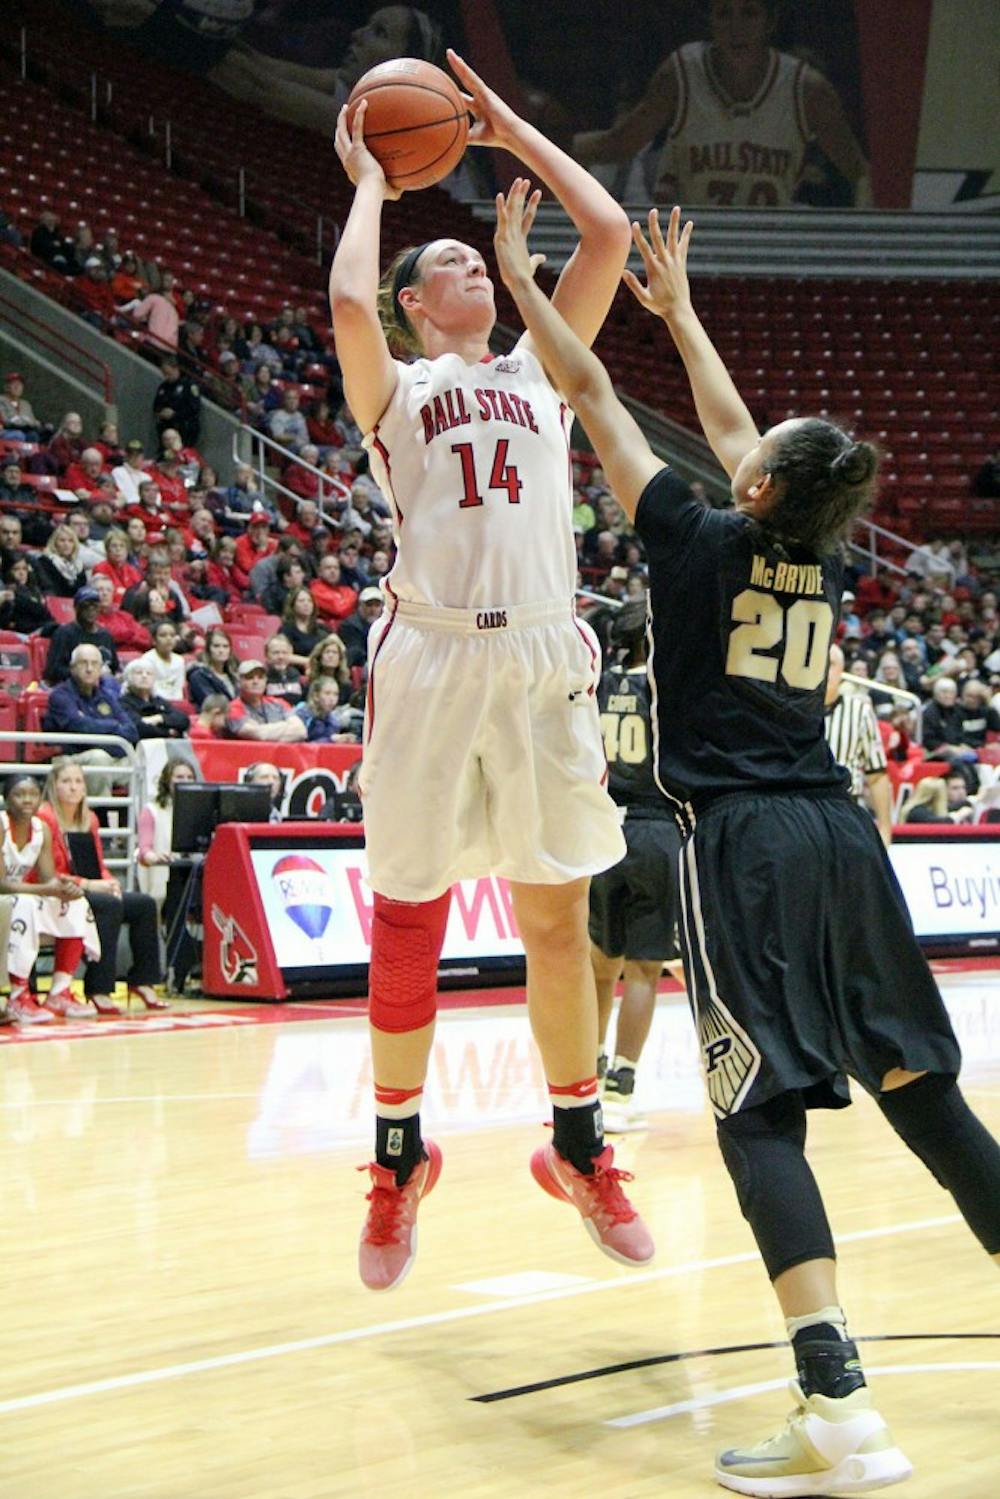 Center Renne Bennett goes up for a shot while being guarded by Dominique McBryde during the Cardinals’ game against Purdue on Dec. 8 in Worthen Arena. Ball State lost 42 to 58. Paige Grider// DN